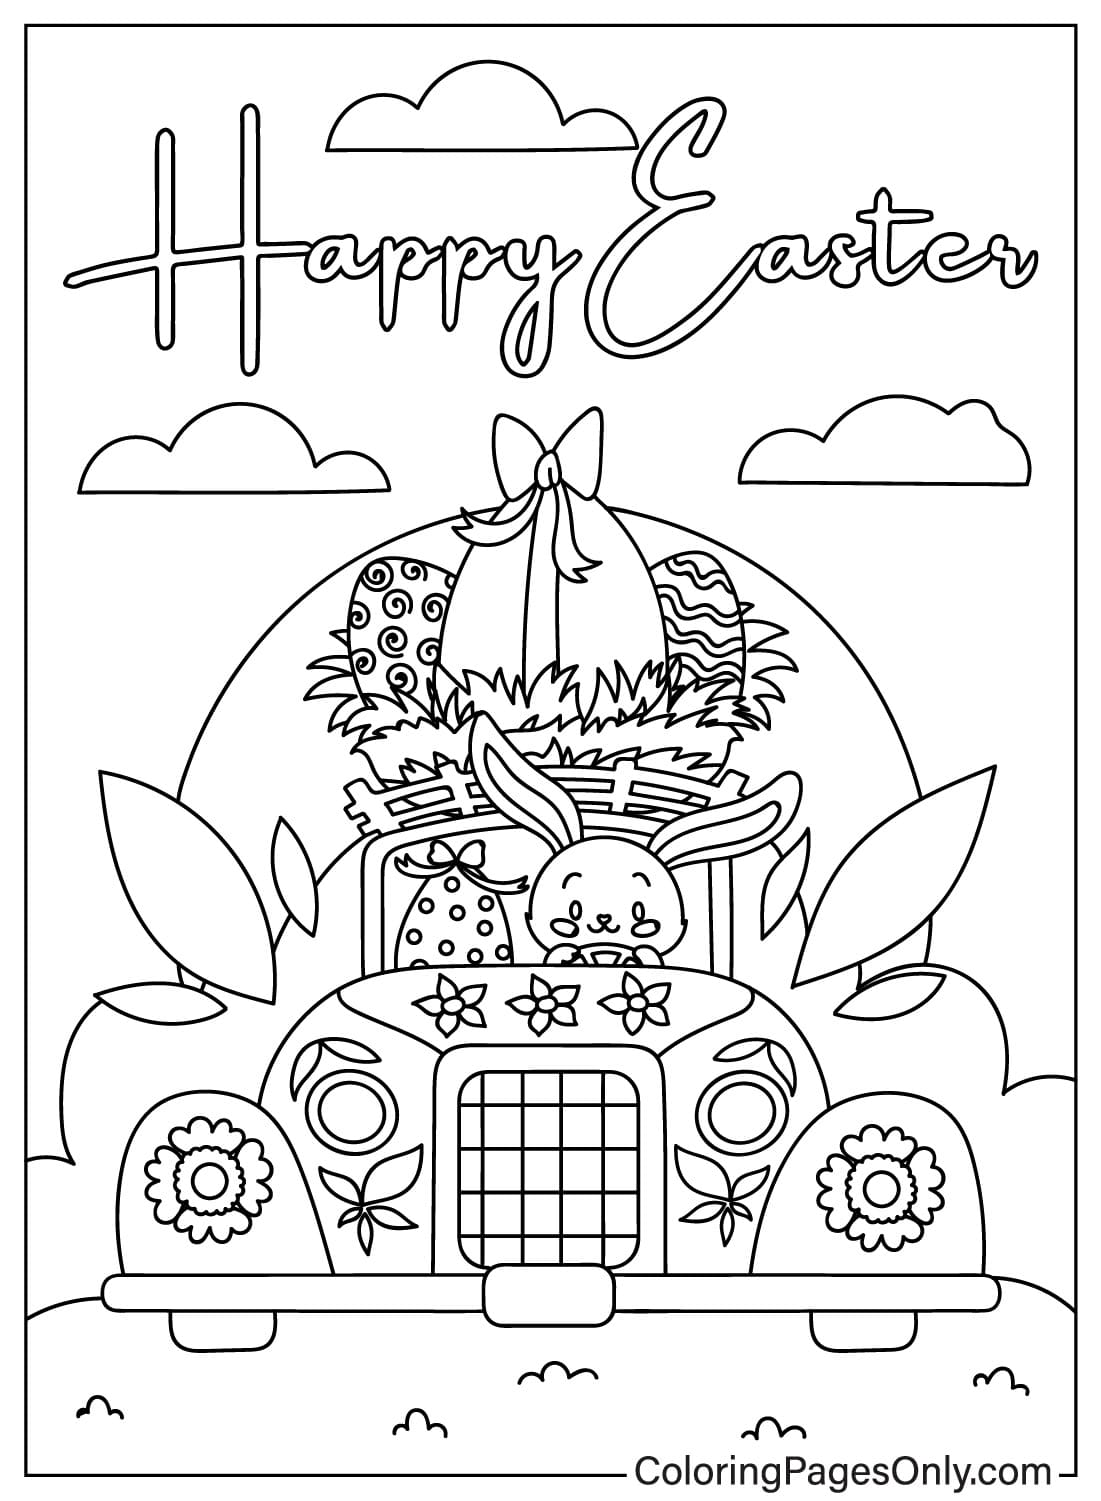 Easter Bunny Coloring Page Free Coloring Page